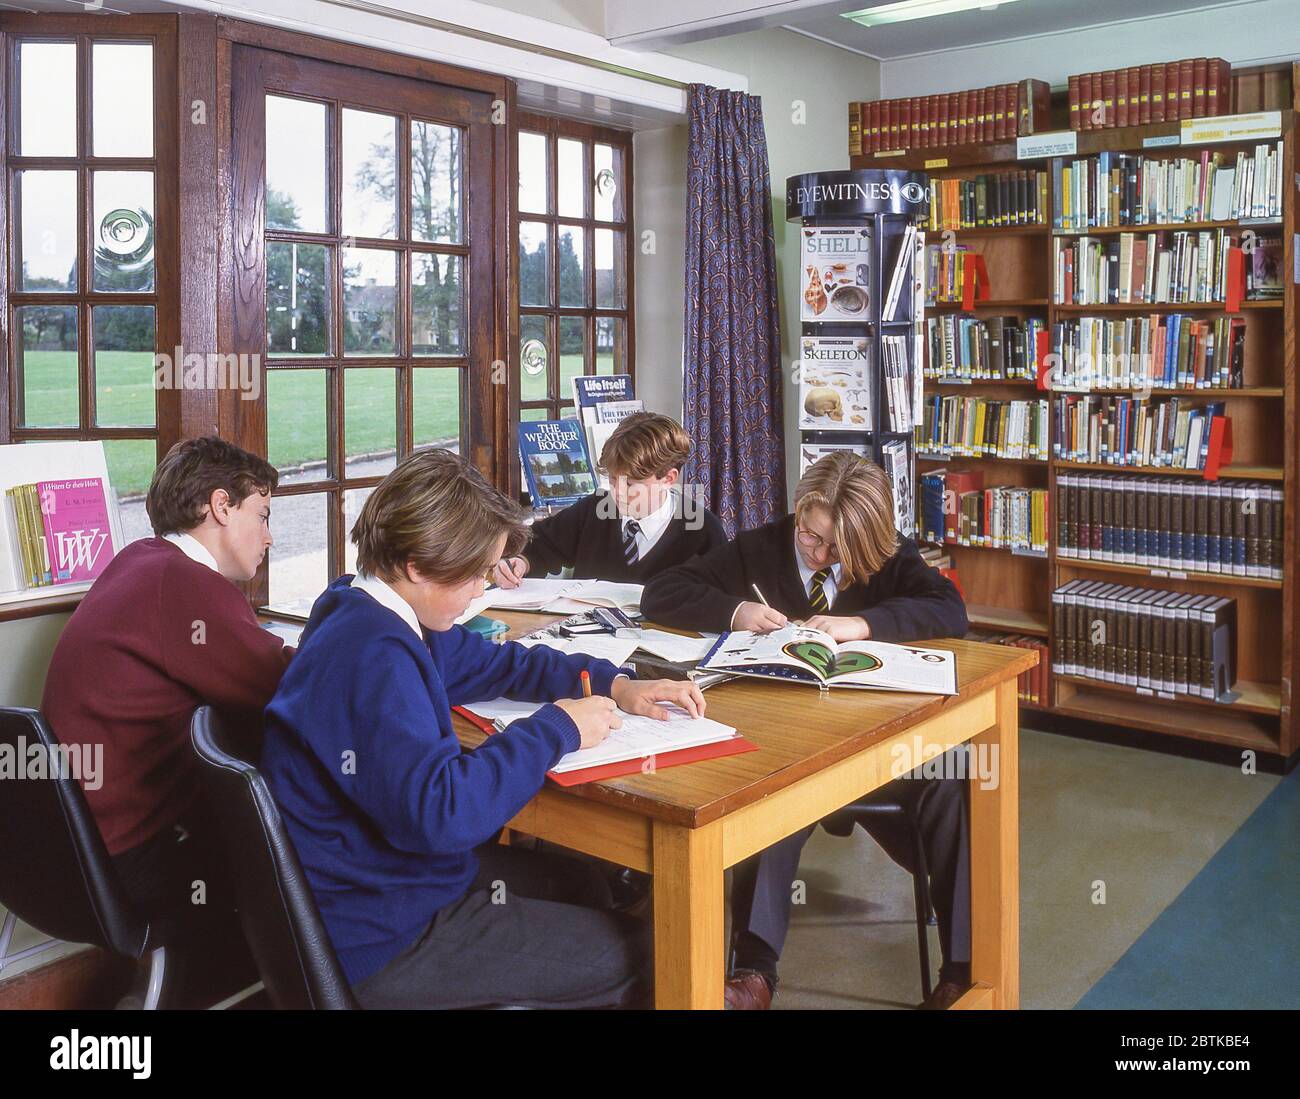 Students studying in school library, Surrey, England, United Kingdom Stock Photo